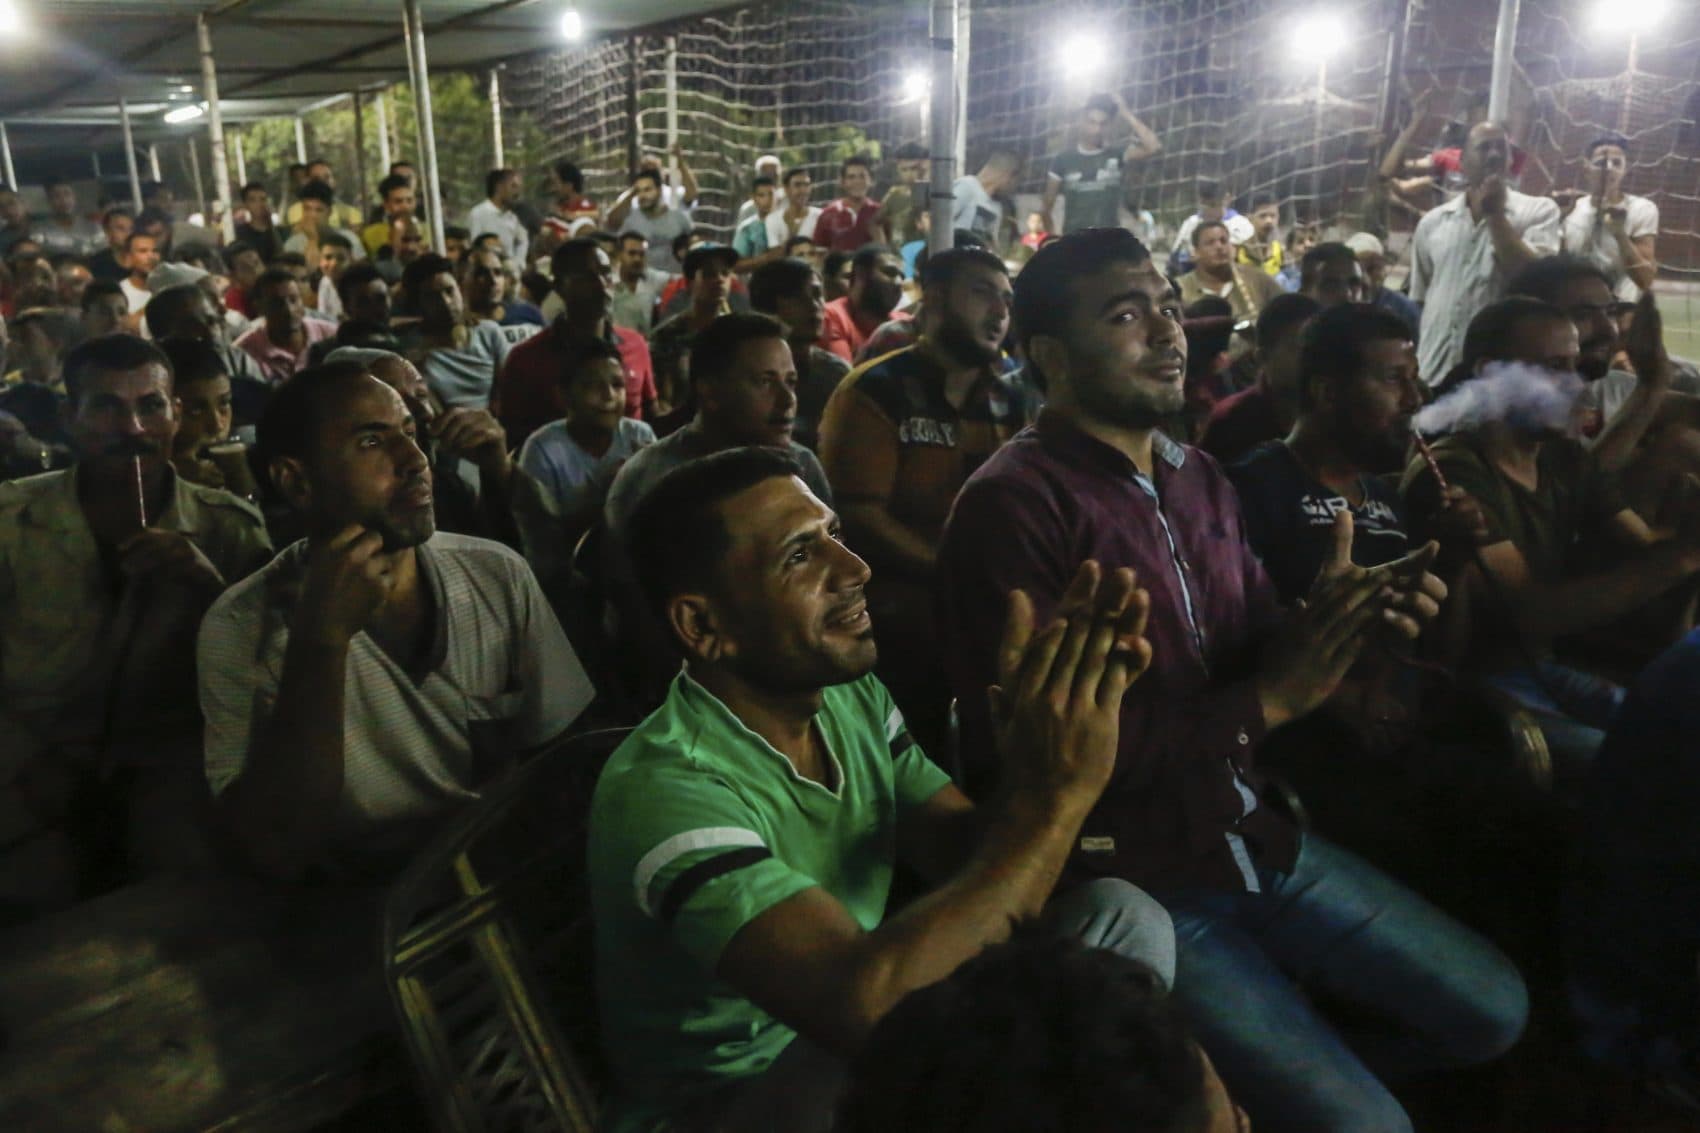 Egyptian fans watch the Egypt-Russia World Cup game at a cafe in the hometown of Mohammed Salah. (Islam Safwat/AP)